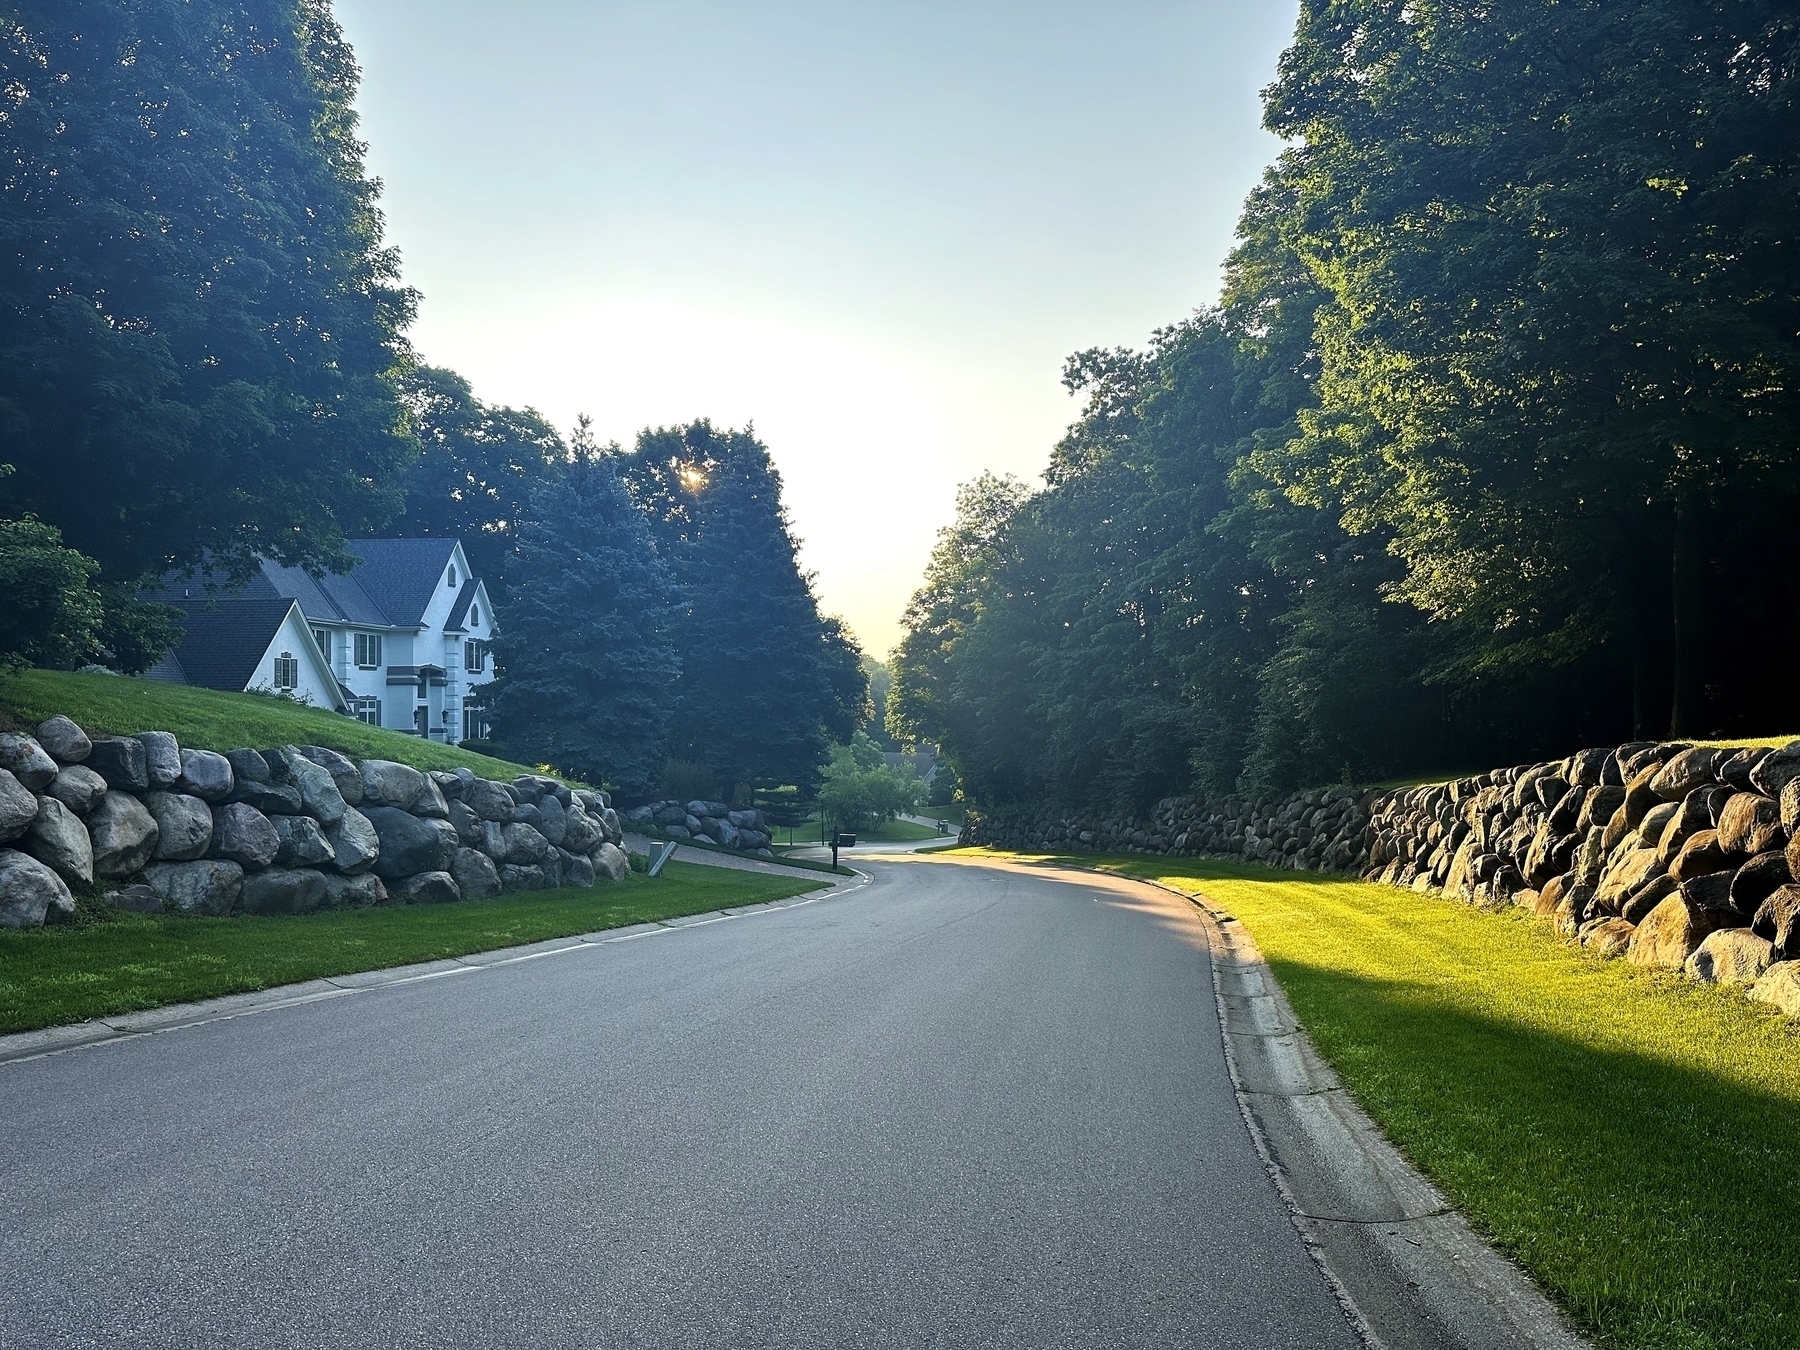 A paved road curves gently between two stone walls with green grass bordered by tall trees and flanked on the left side by a white house nestled among trees.